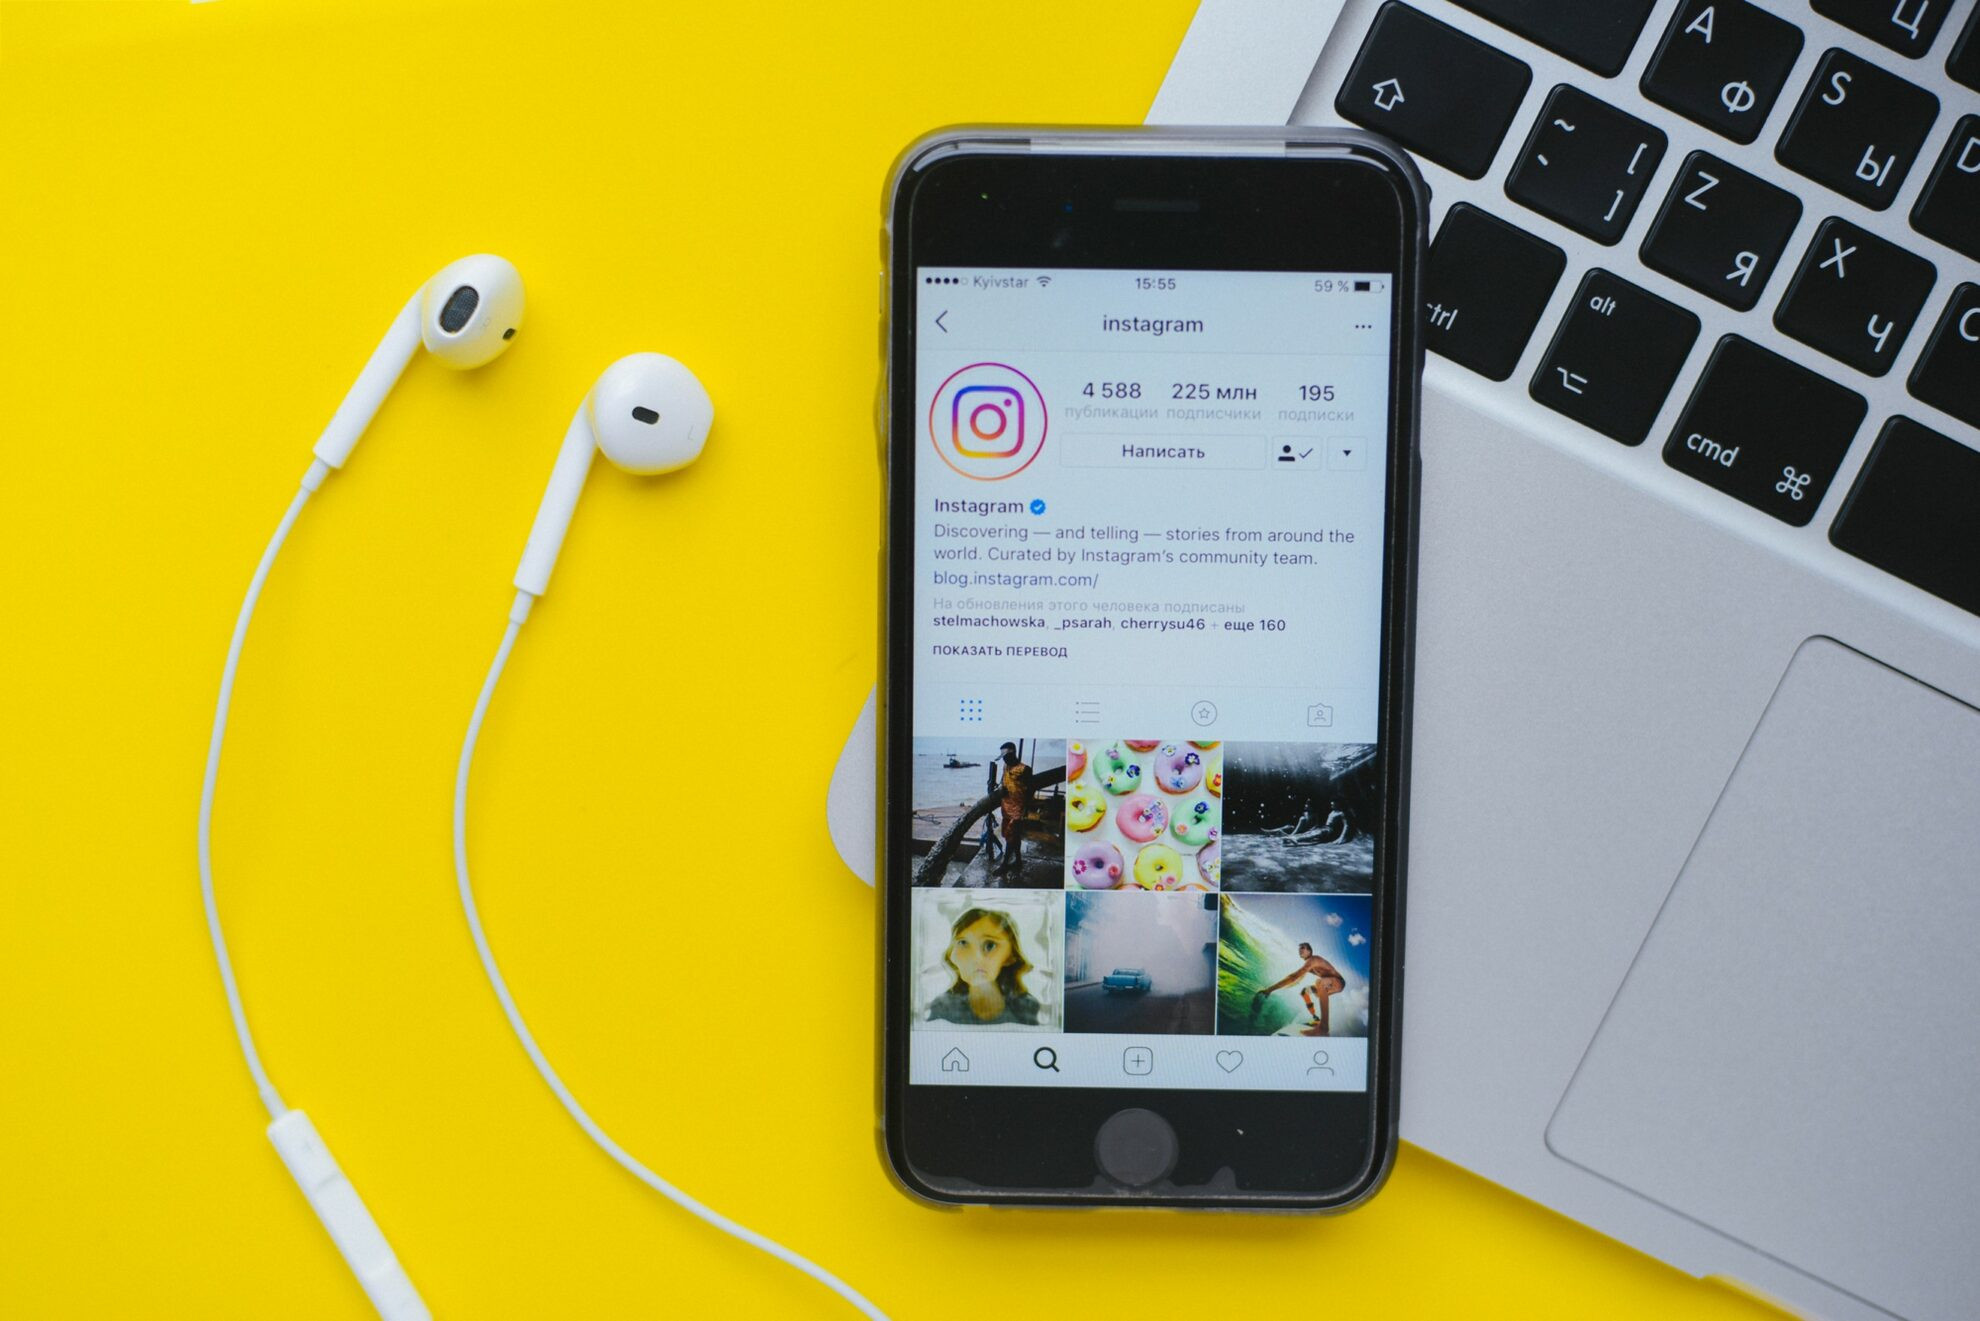 Mobile phone on a laptop with earphones open on an Instagram profile